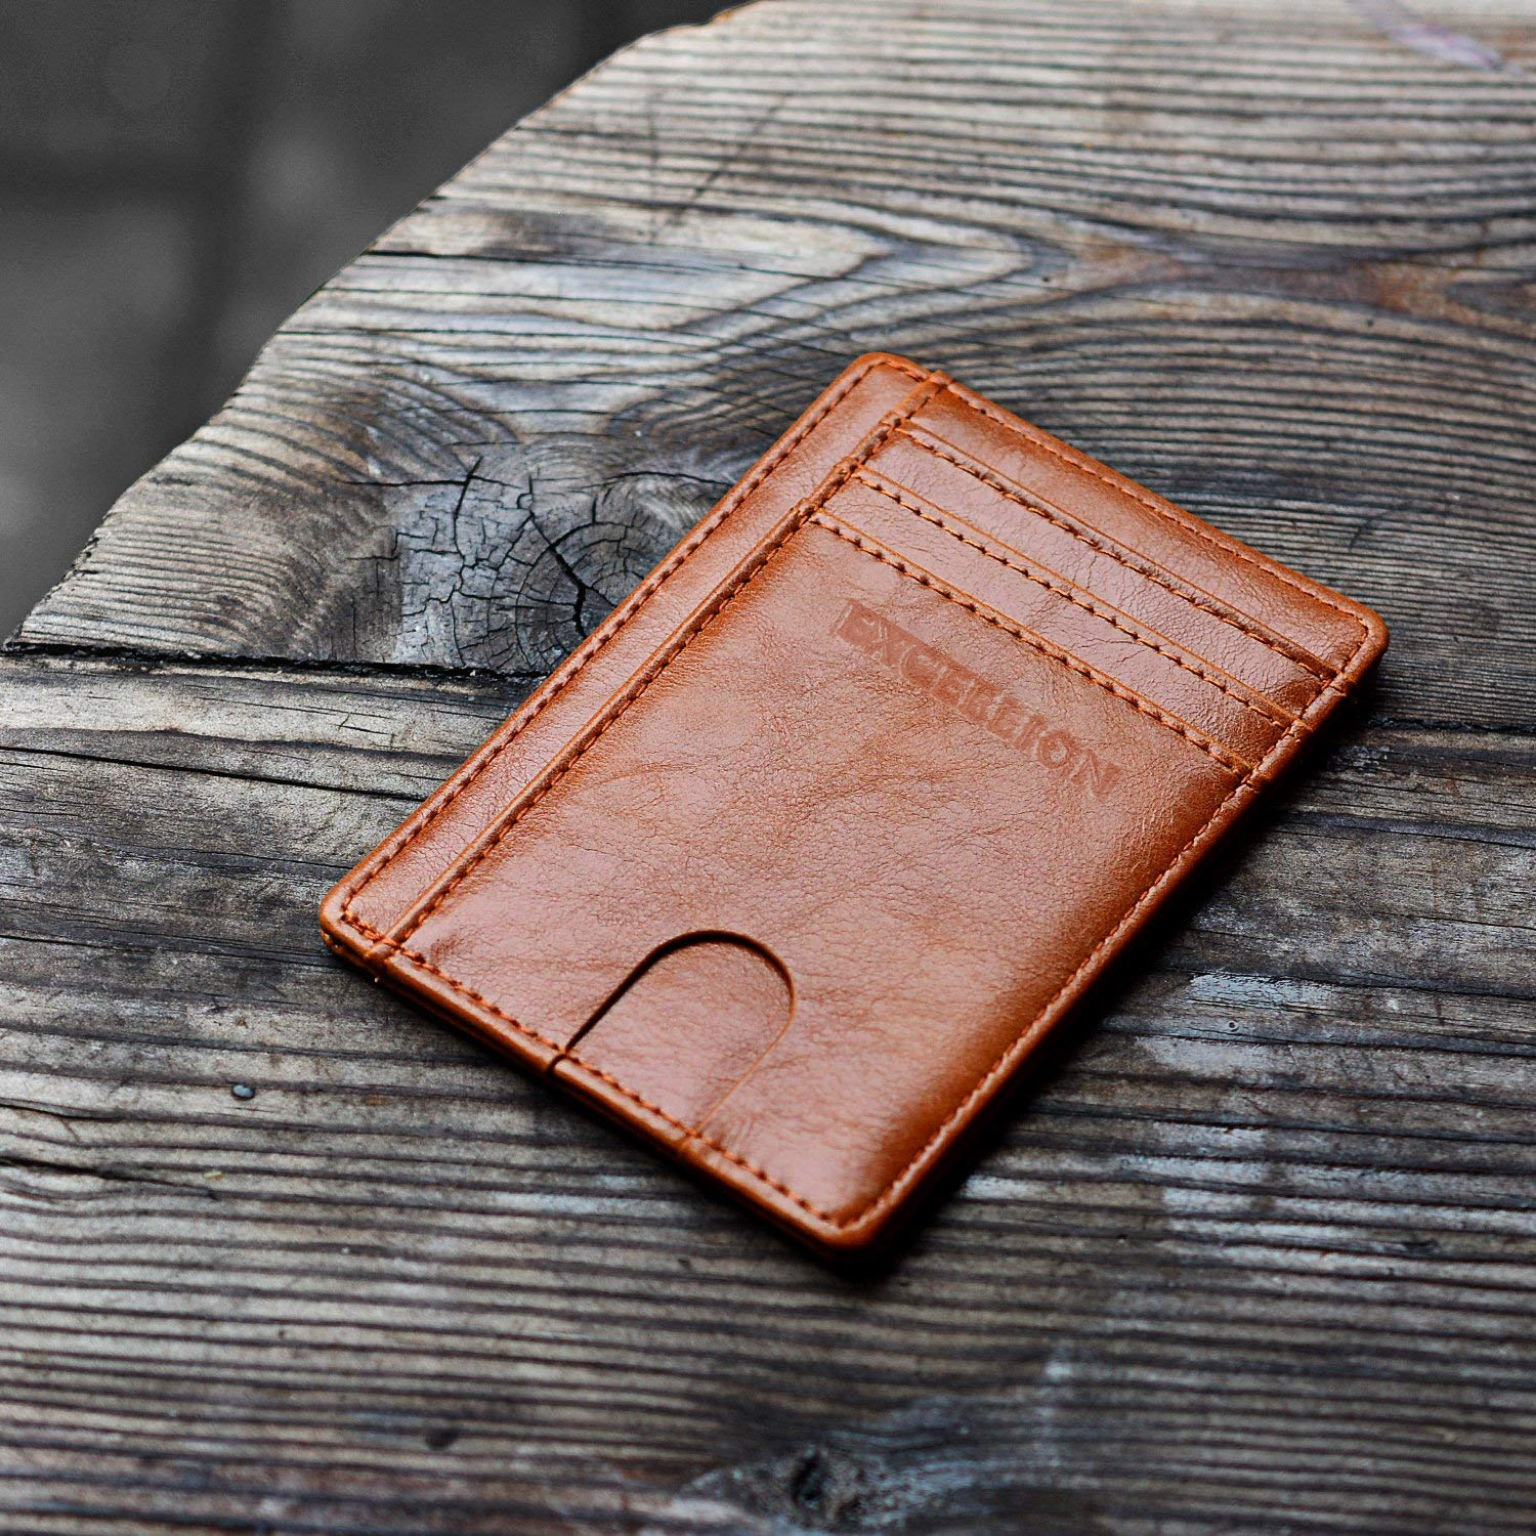 Protect Your Personal Information with RFID Blocking Wallets